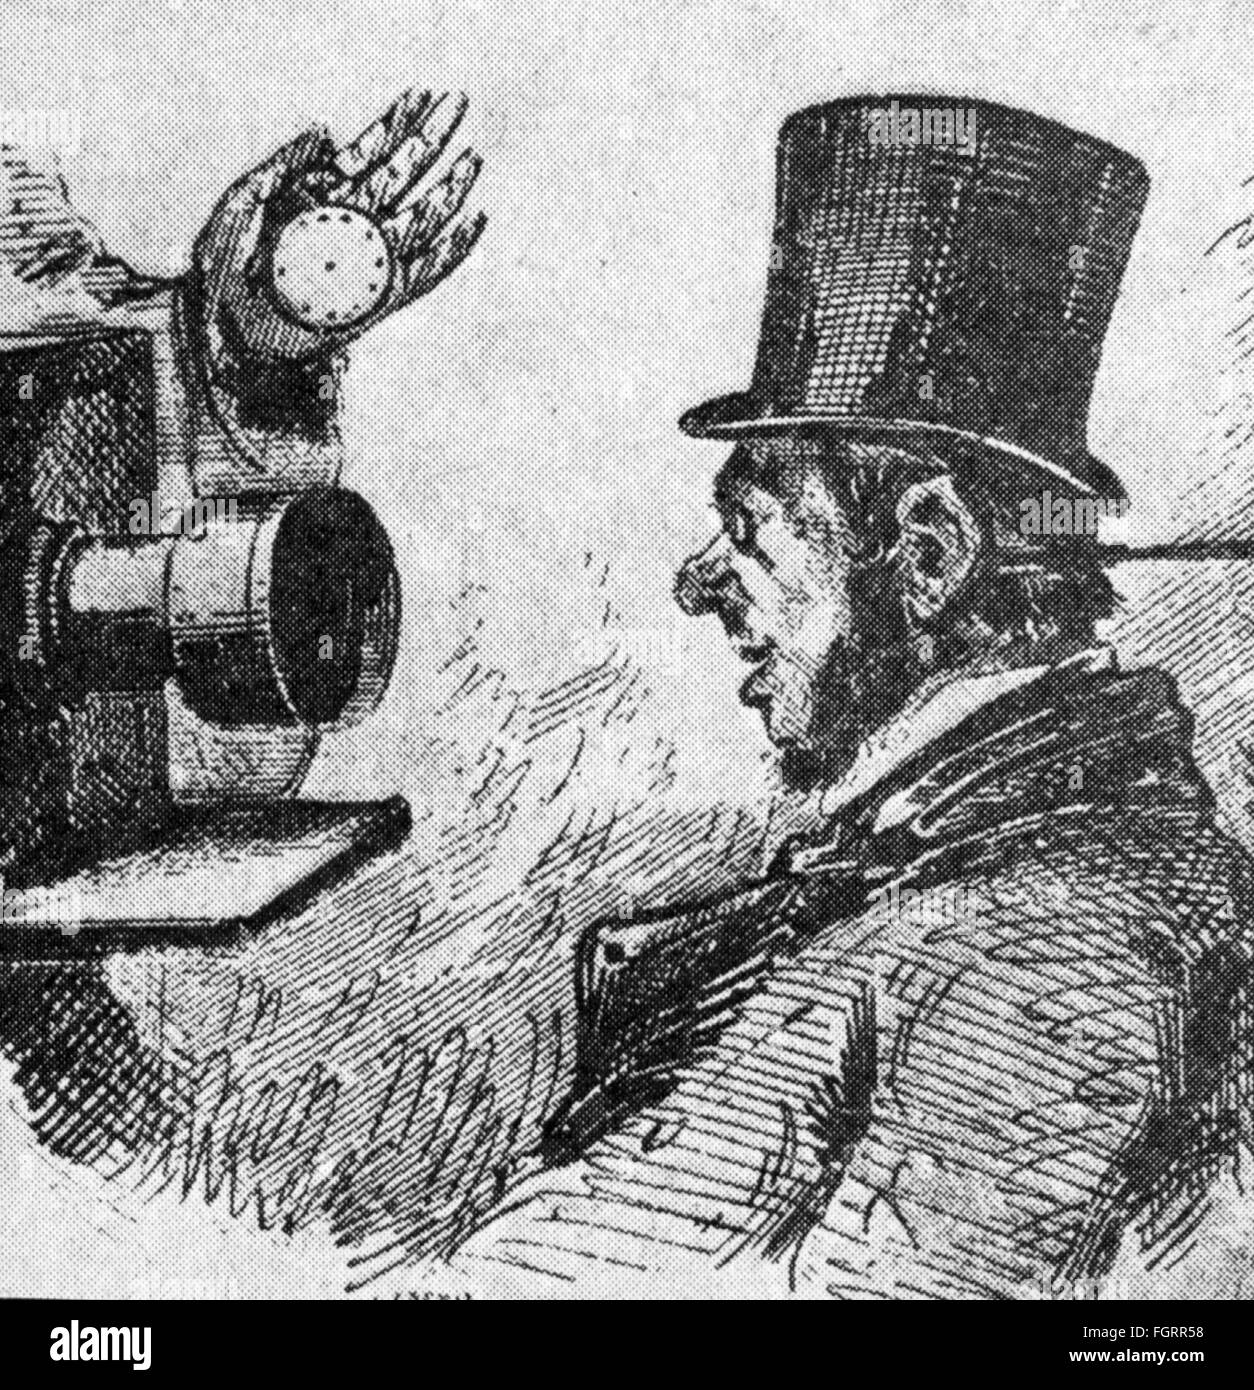 photography,caricature,man sitting for a portrait,wood engraving,19th century,19th century,graphic,graphics,humor,humour,satire,holding,hold,pocket watch,watch,pocket watches,watches,tophat,top hat,tophats,top-hat,topper,high hat,top-hats,toppers,high hats,miniature,miniatures,rest,support,rests,supports,headrest,head restraint,headrests,active head restraints,exposure time,exposure times,duration of exposure,photo camera,camera,cameras,headpiece,headpieces,caricature,caricatures,man,men,historic,historical,man,,Additional-Rights-Clearences-Not Available Stock Photo